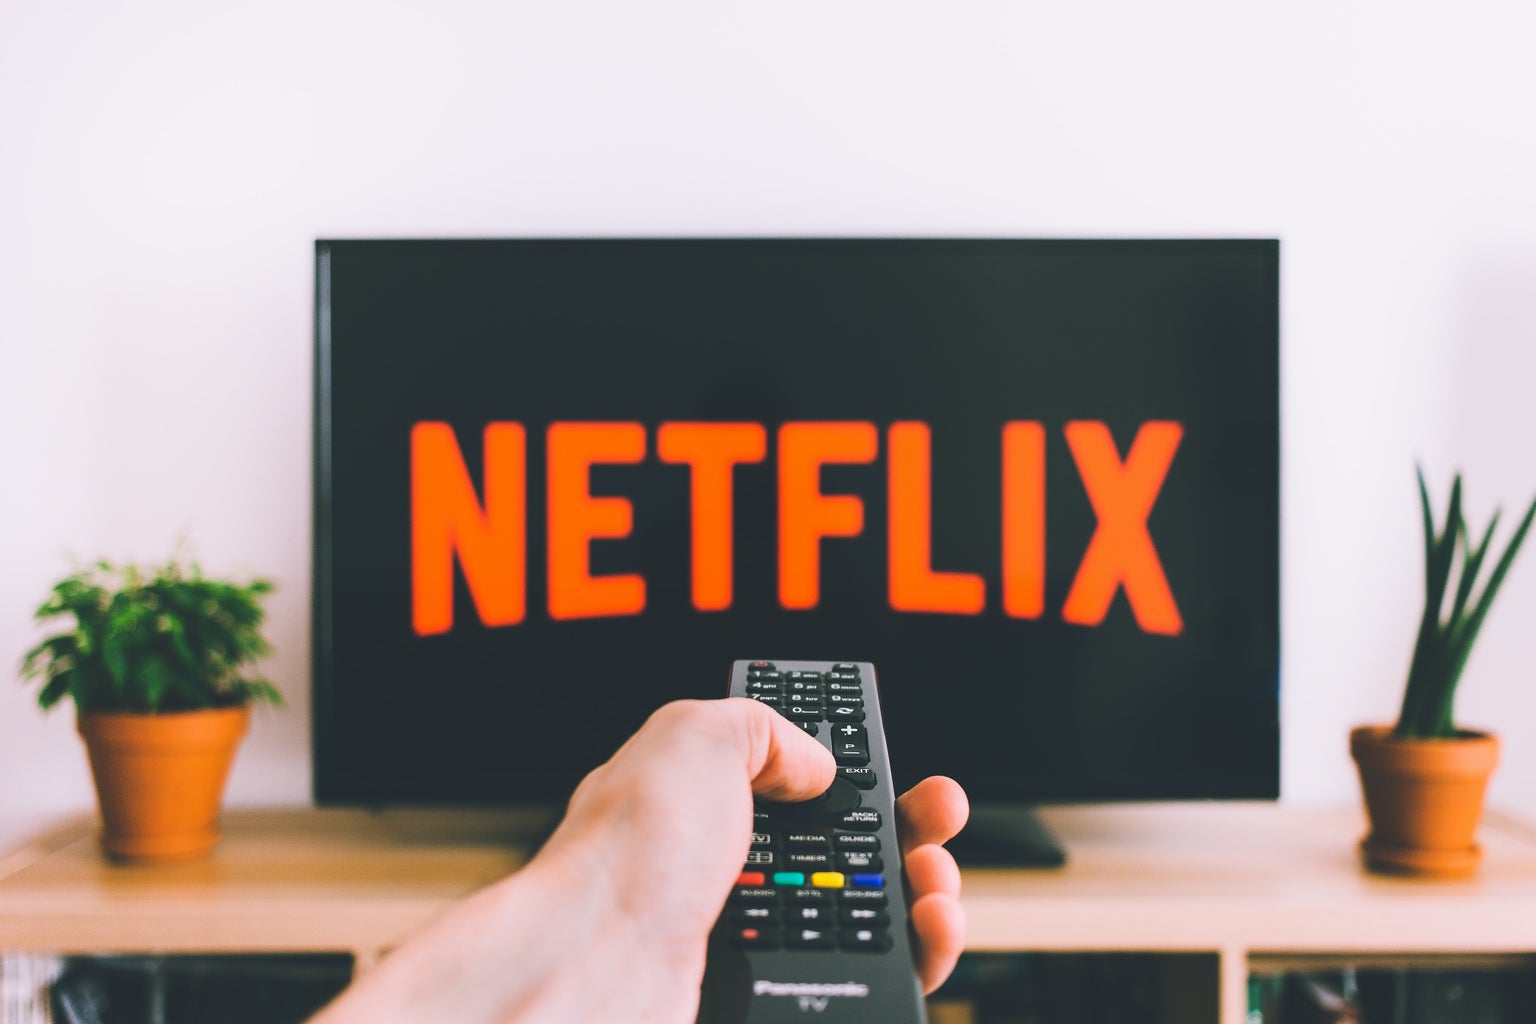 person holding a remote control pointed at TV streaming netflix